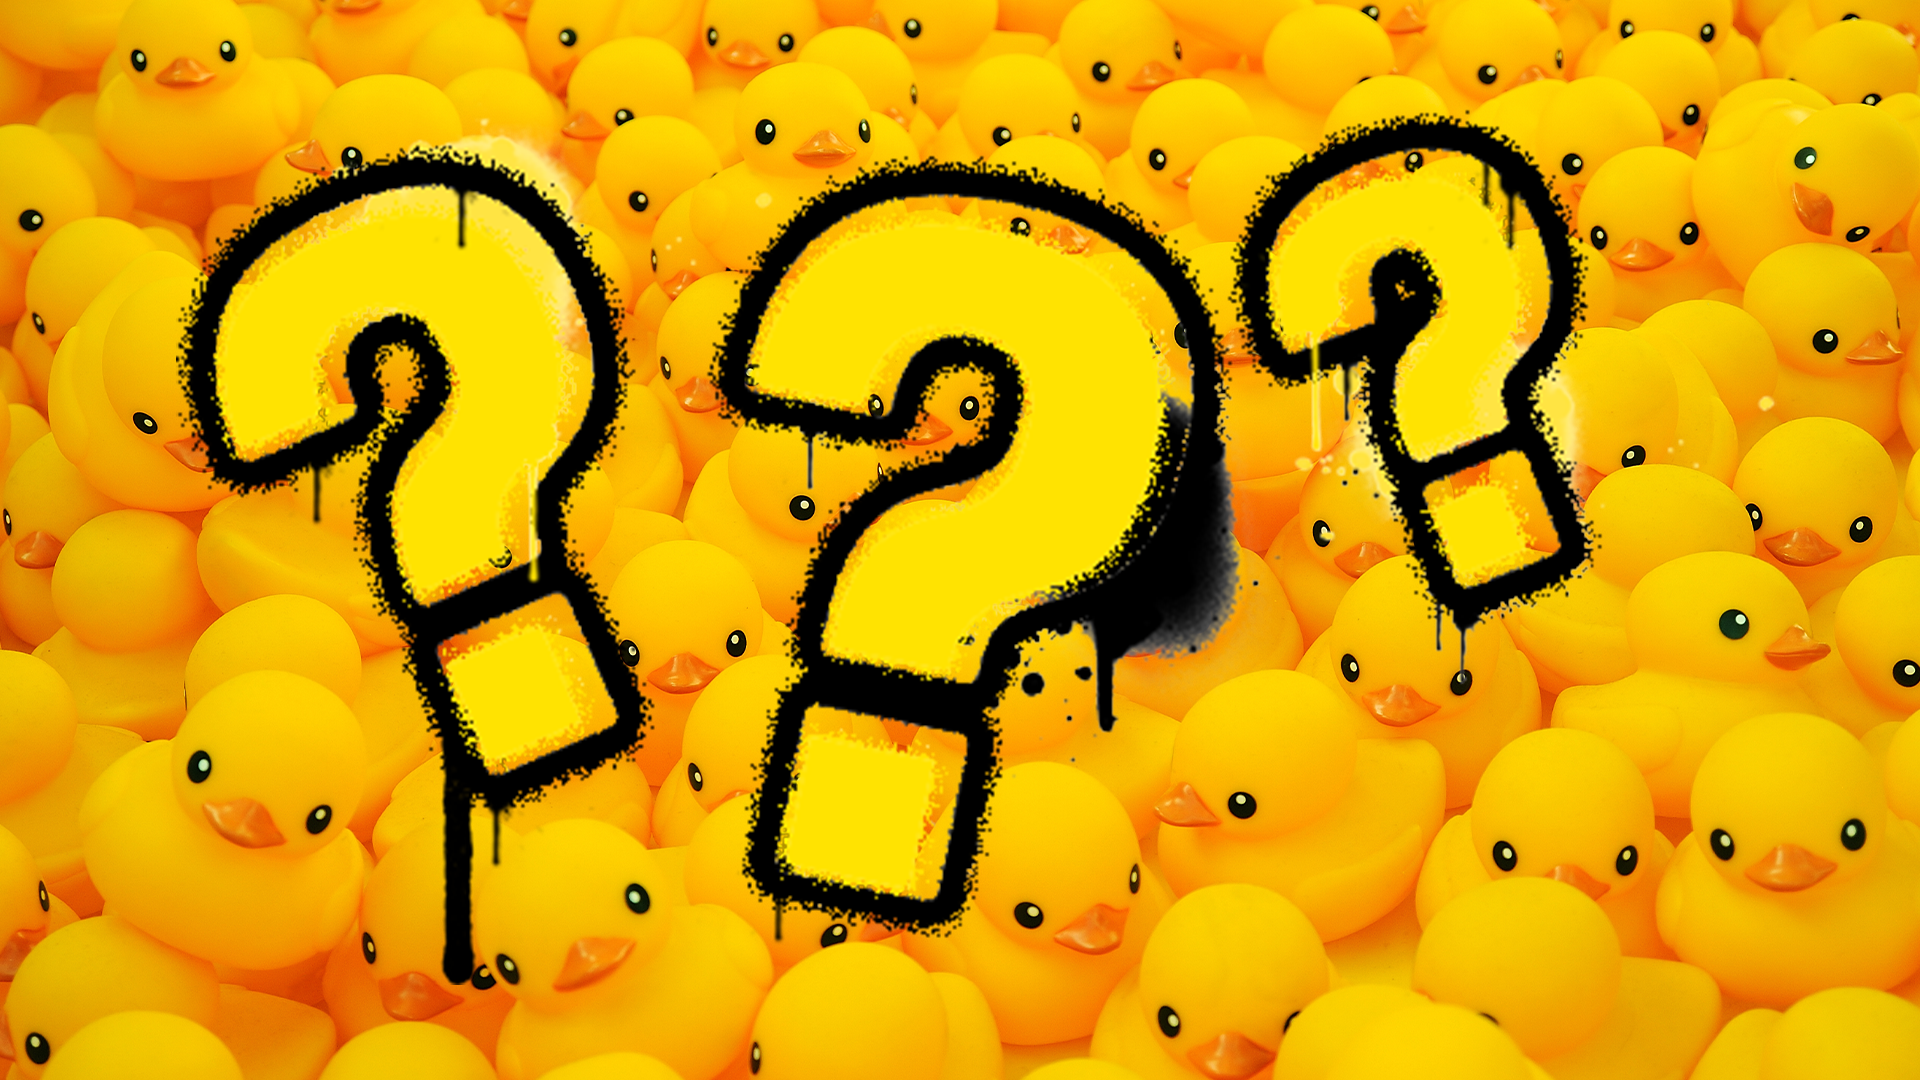 Question marks on rubber duck background 